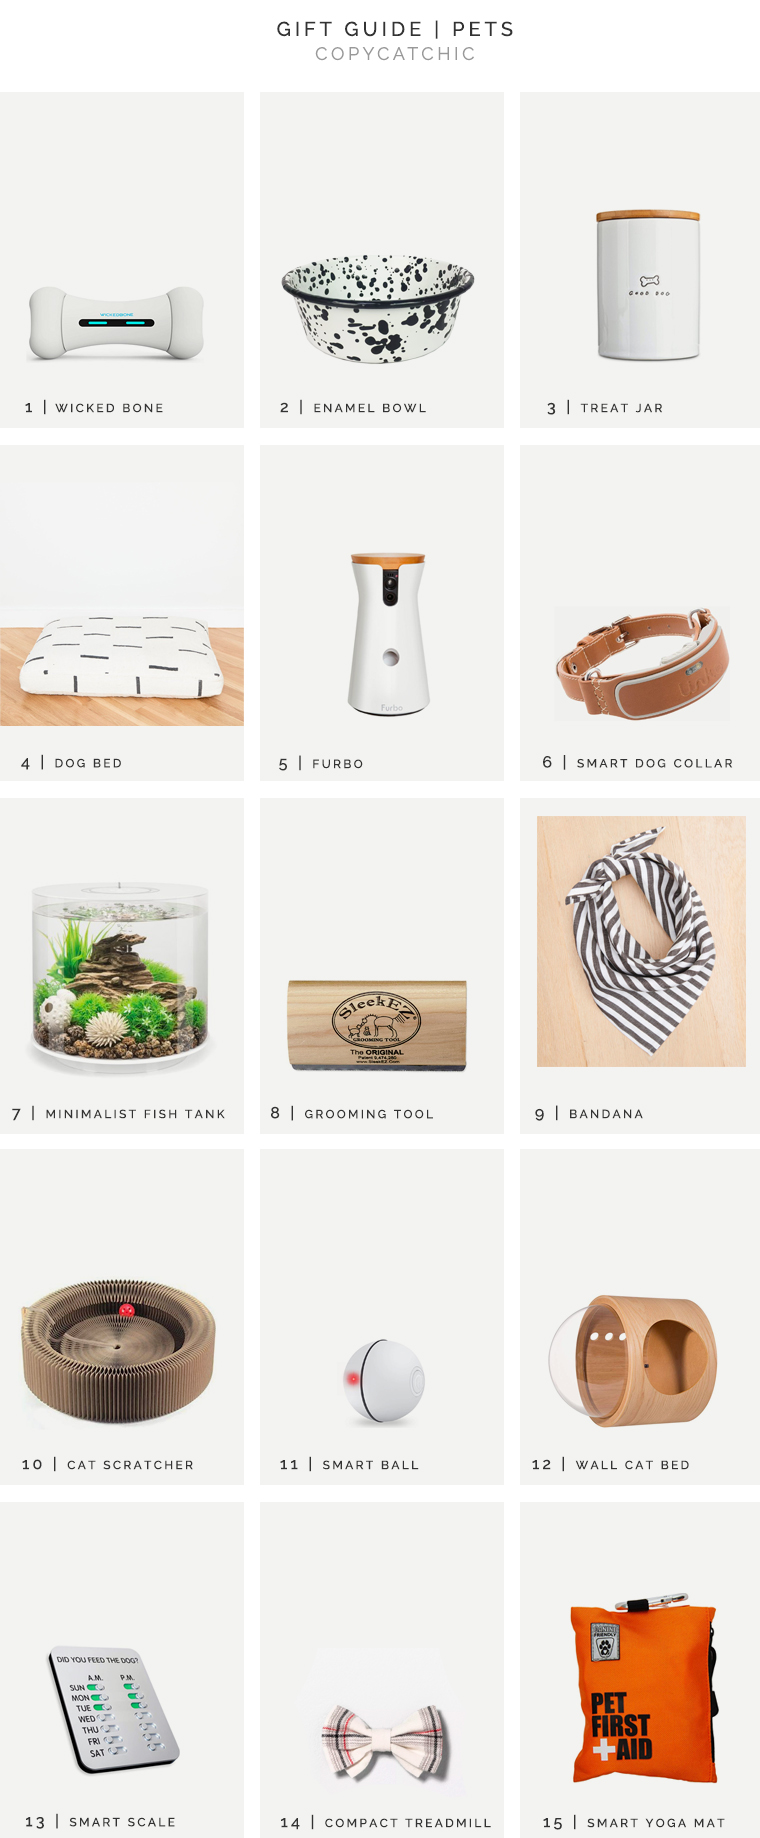 Holiday Gifts for all types of pets | Copy Cat Chic favorites for 2019 quality, minimalist, modern, practical, reasonably-priced, curated gift ideas for dogs, cats, and fish this holiday season! | Luxe living for less